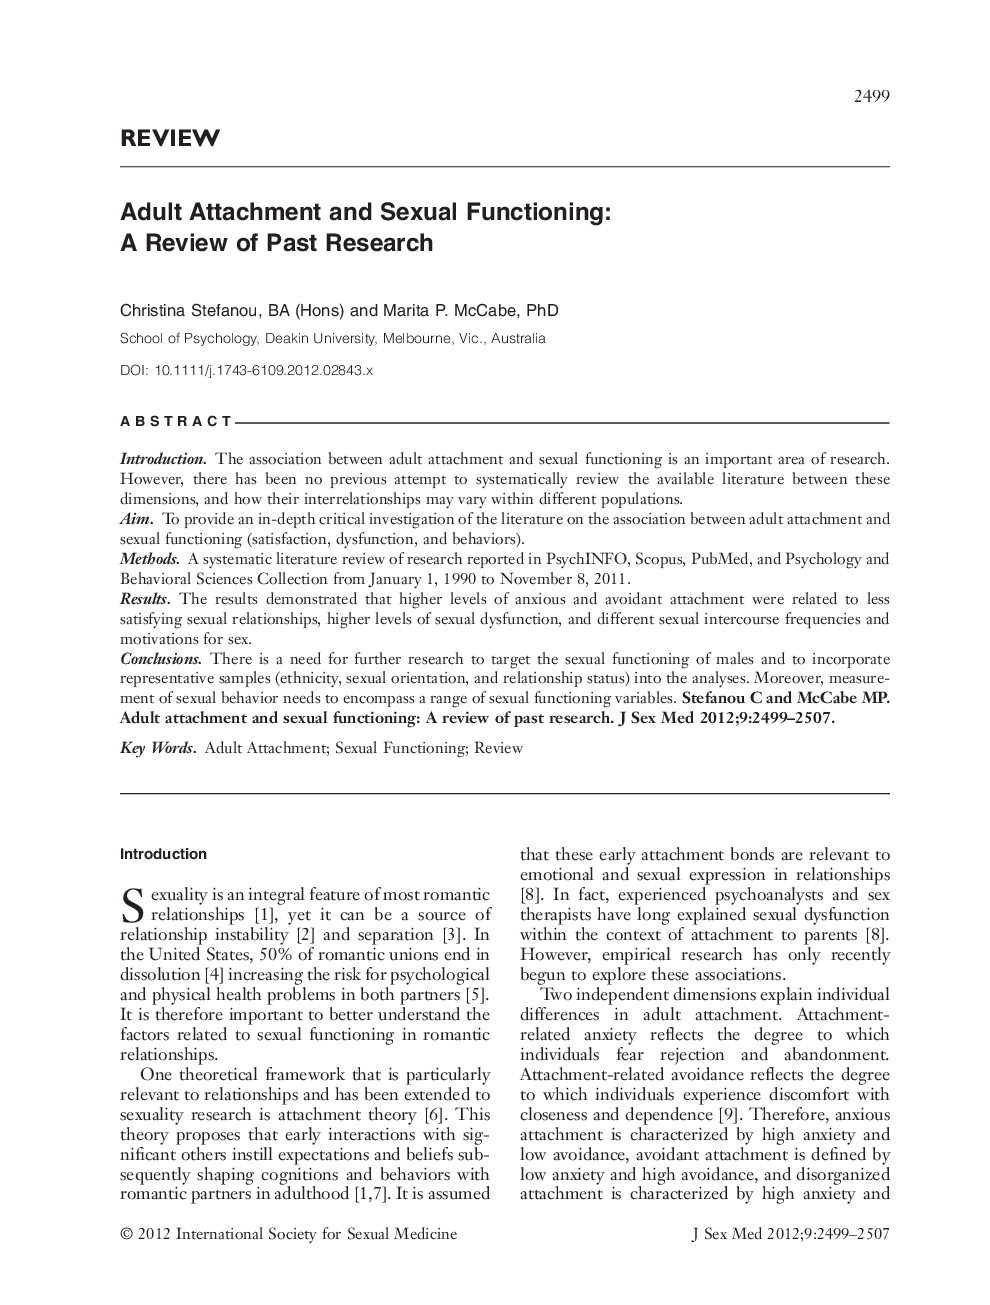 Adult Attachment and Sexual Functioning: A Review of Past Research